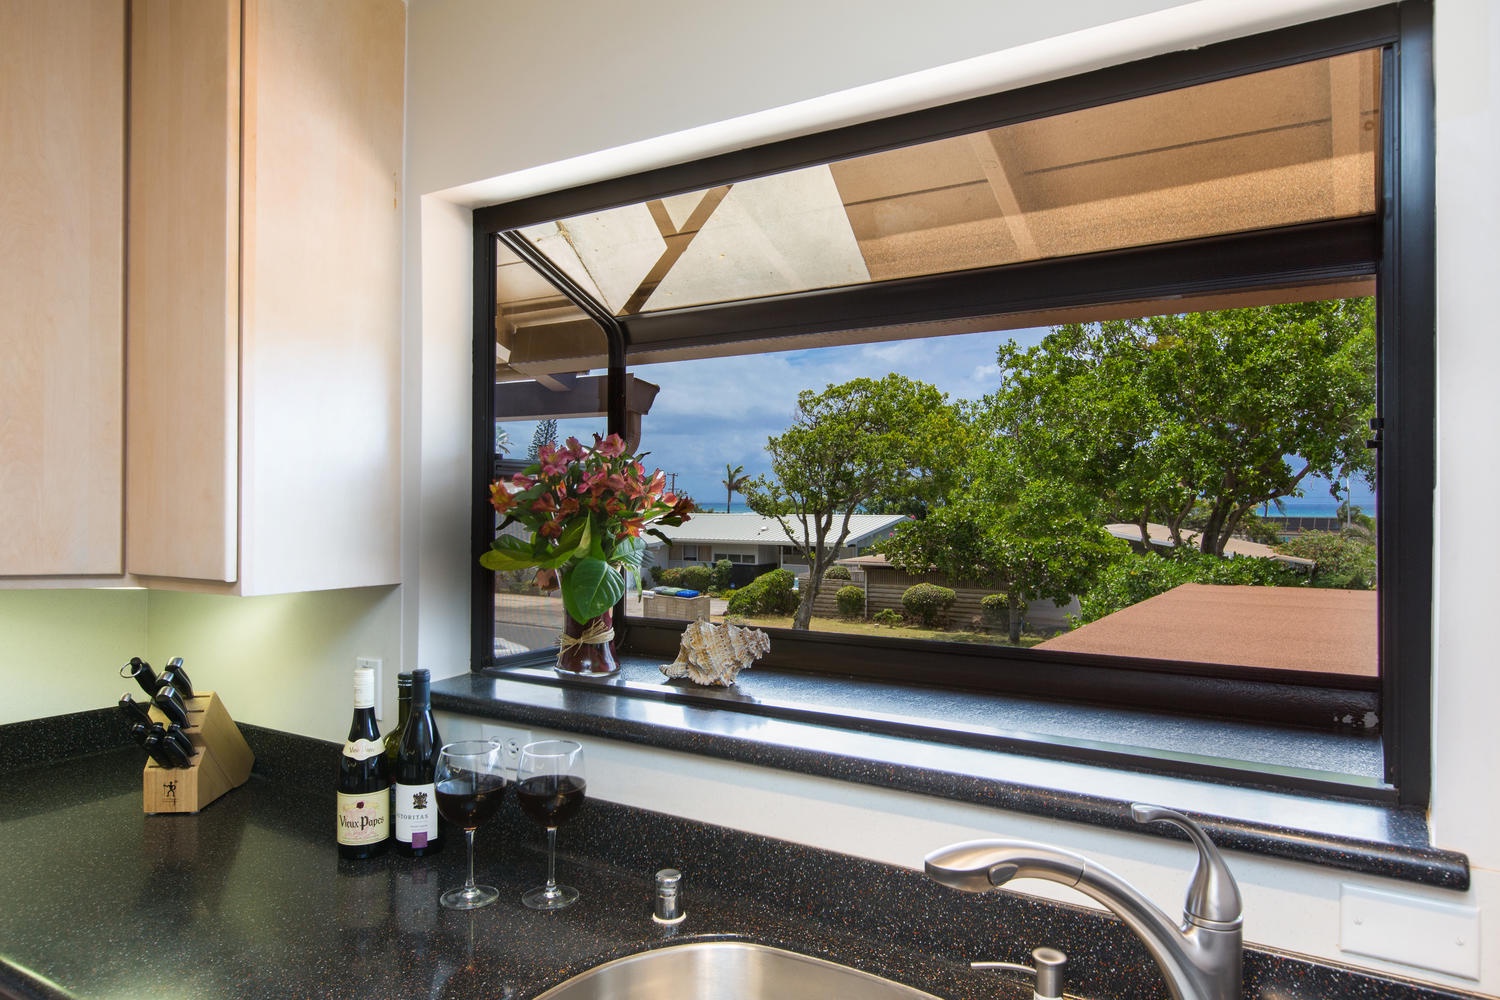 Honolulu Vacation Rentals, Hale Poola - If you have to wash dishes while on vacation, at least you'll have an ocean view!